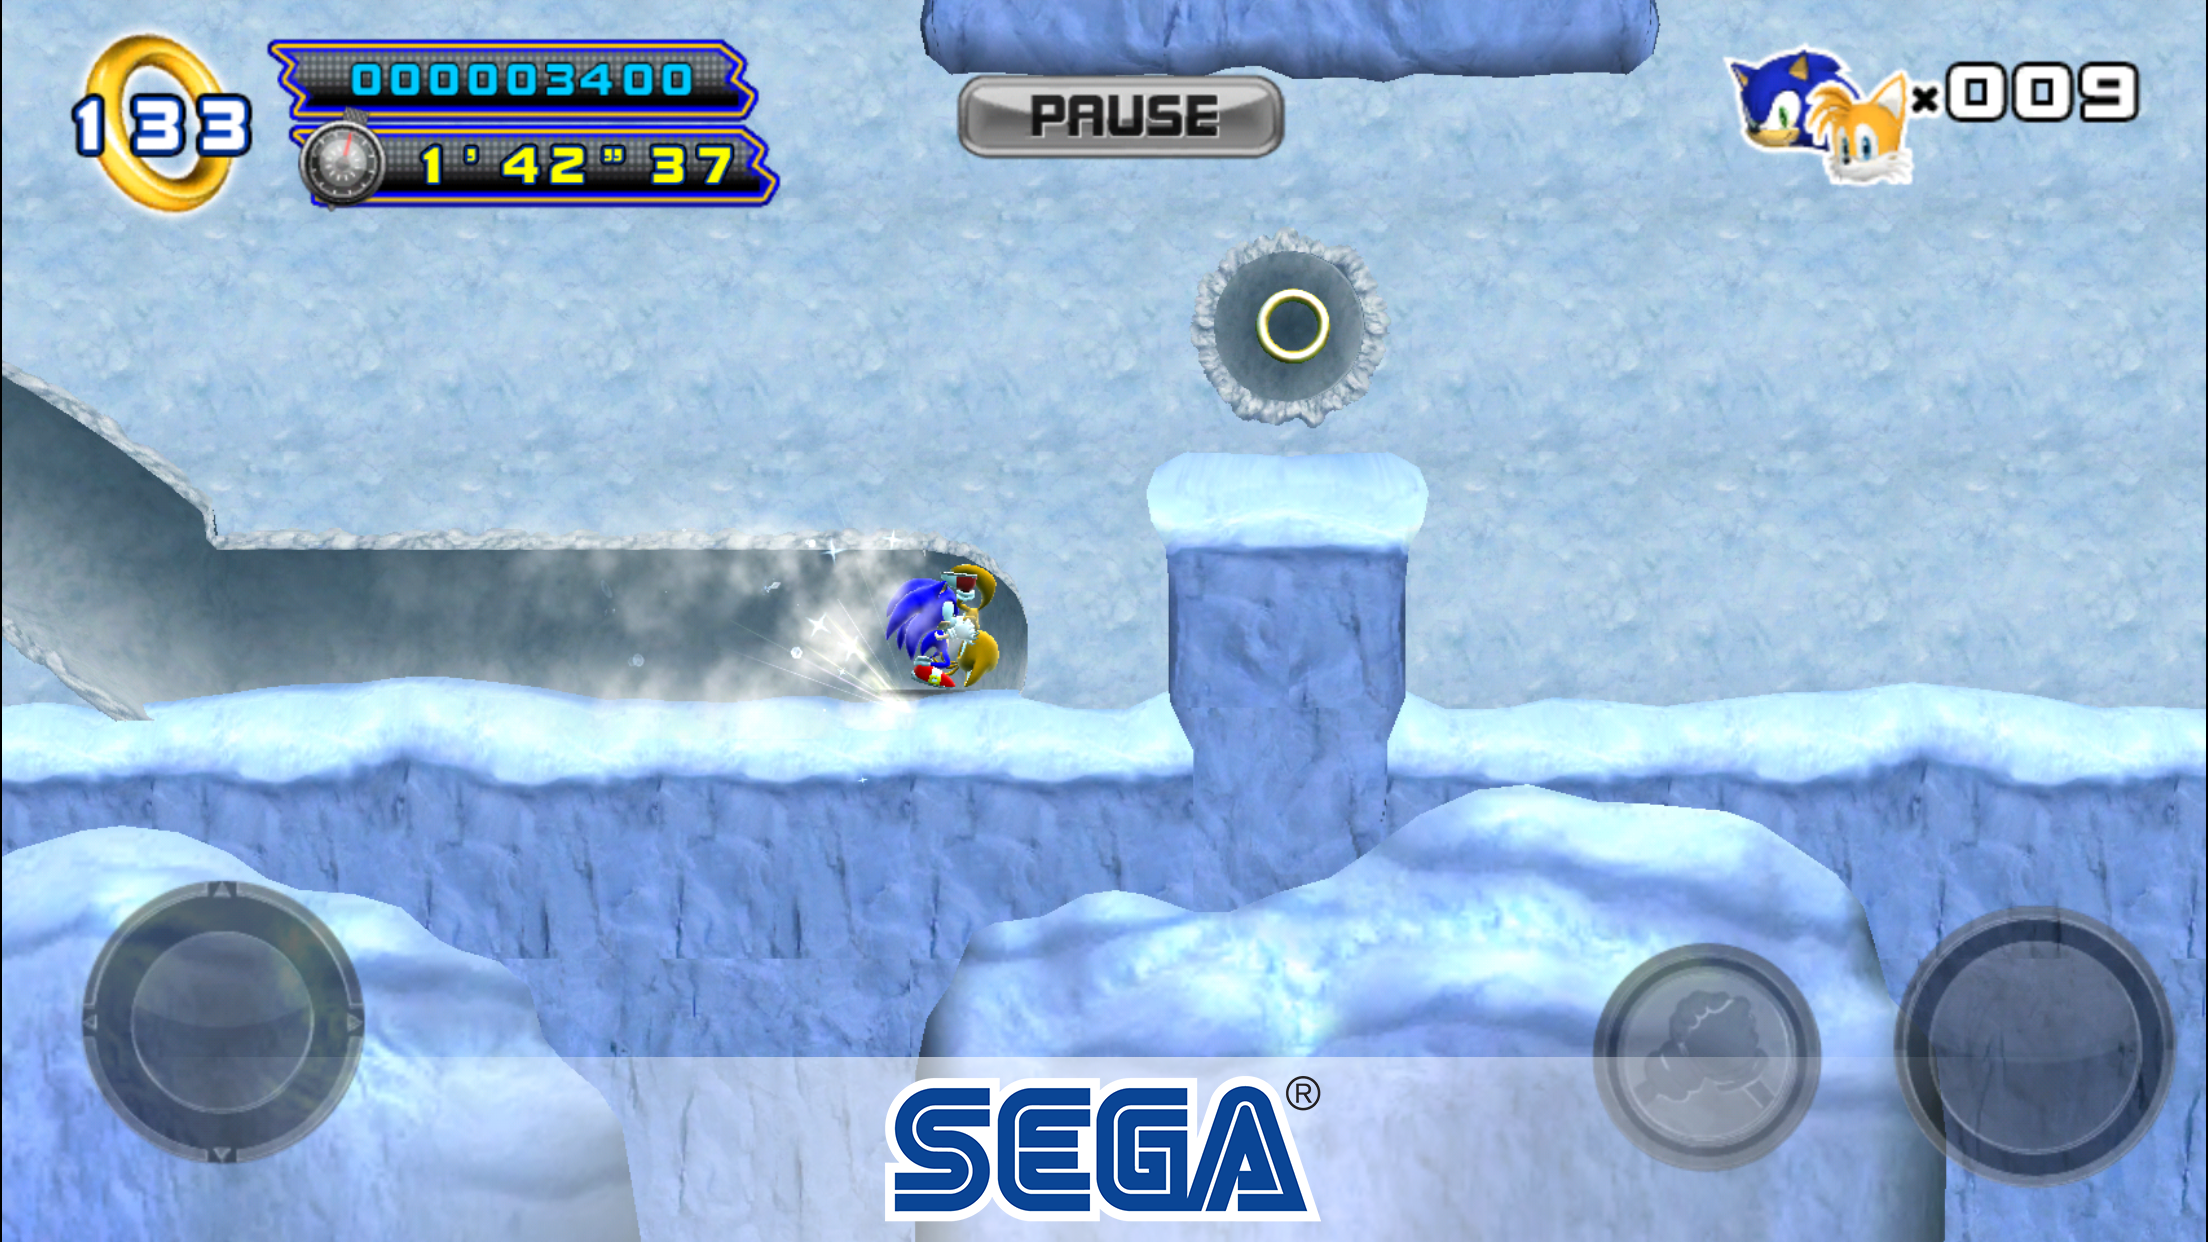 Sonic The Hedgehog 4: Episode II' available for Xperia Play and non-Tegra  Android devices - Polygon